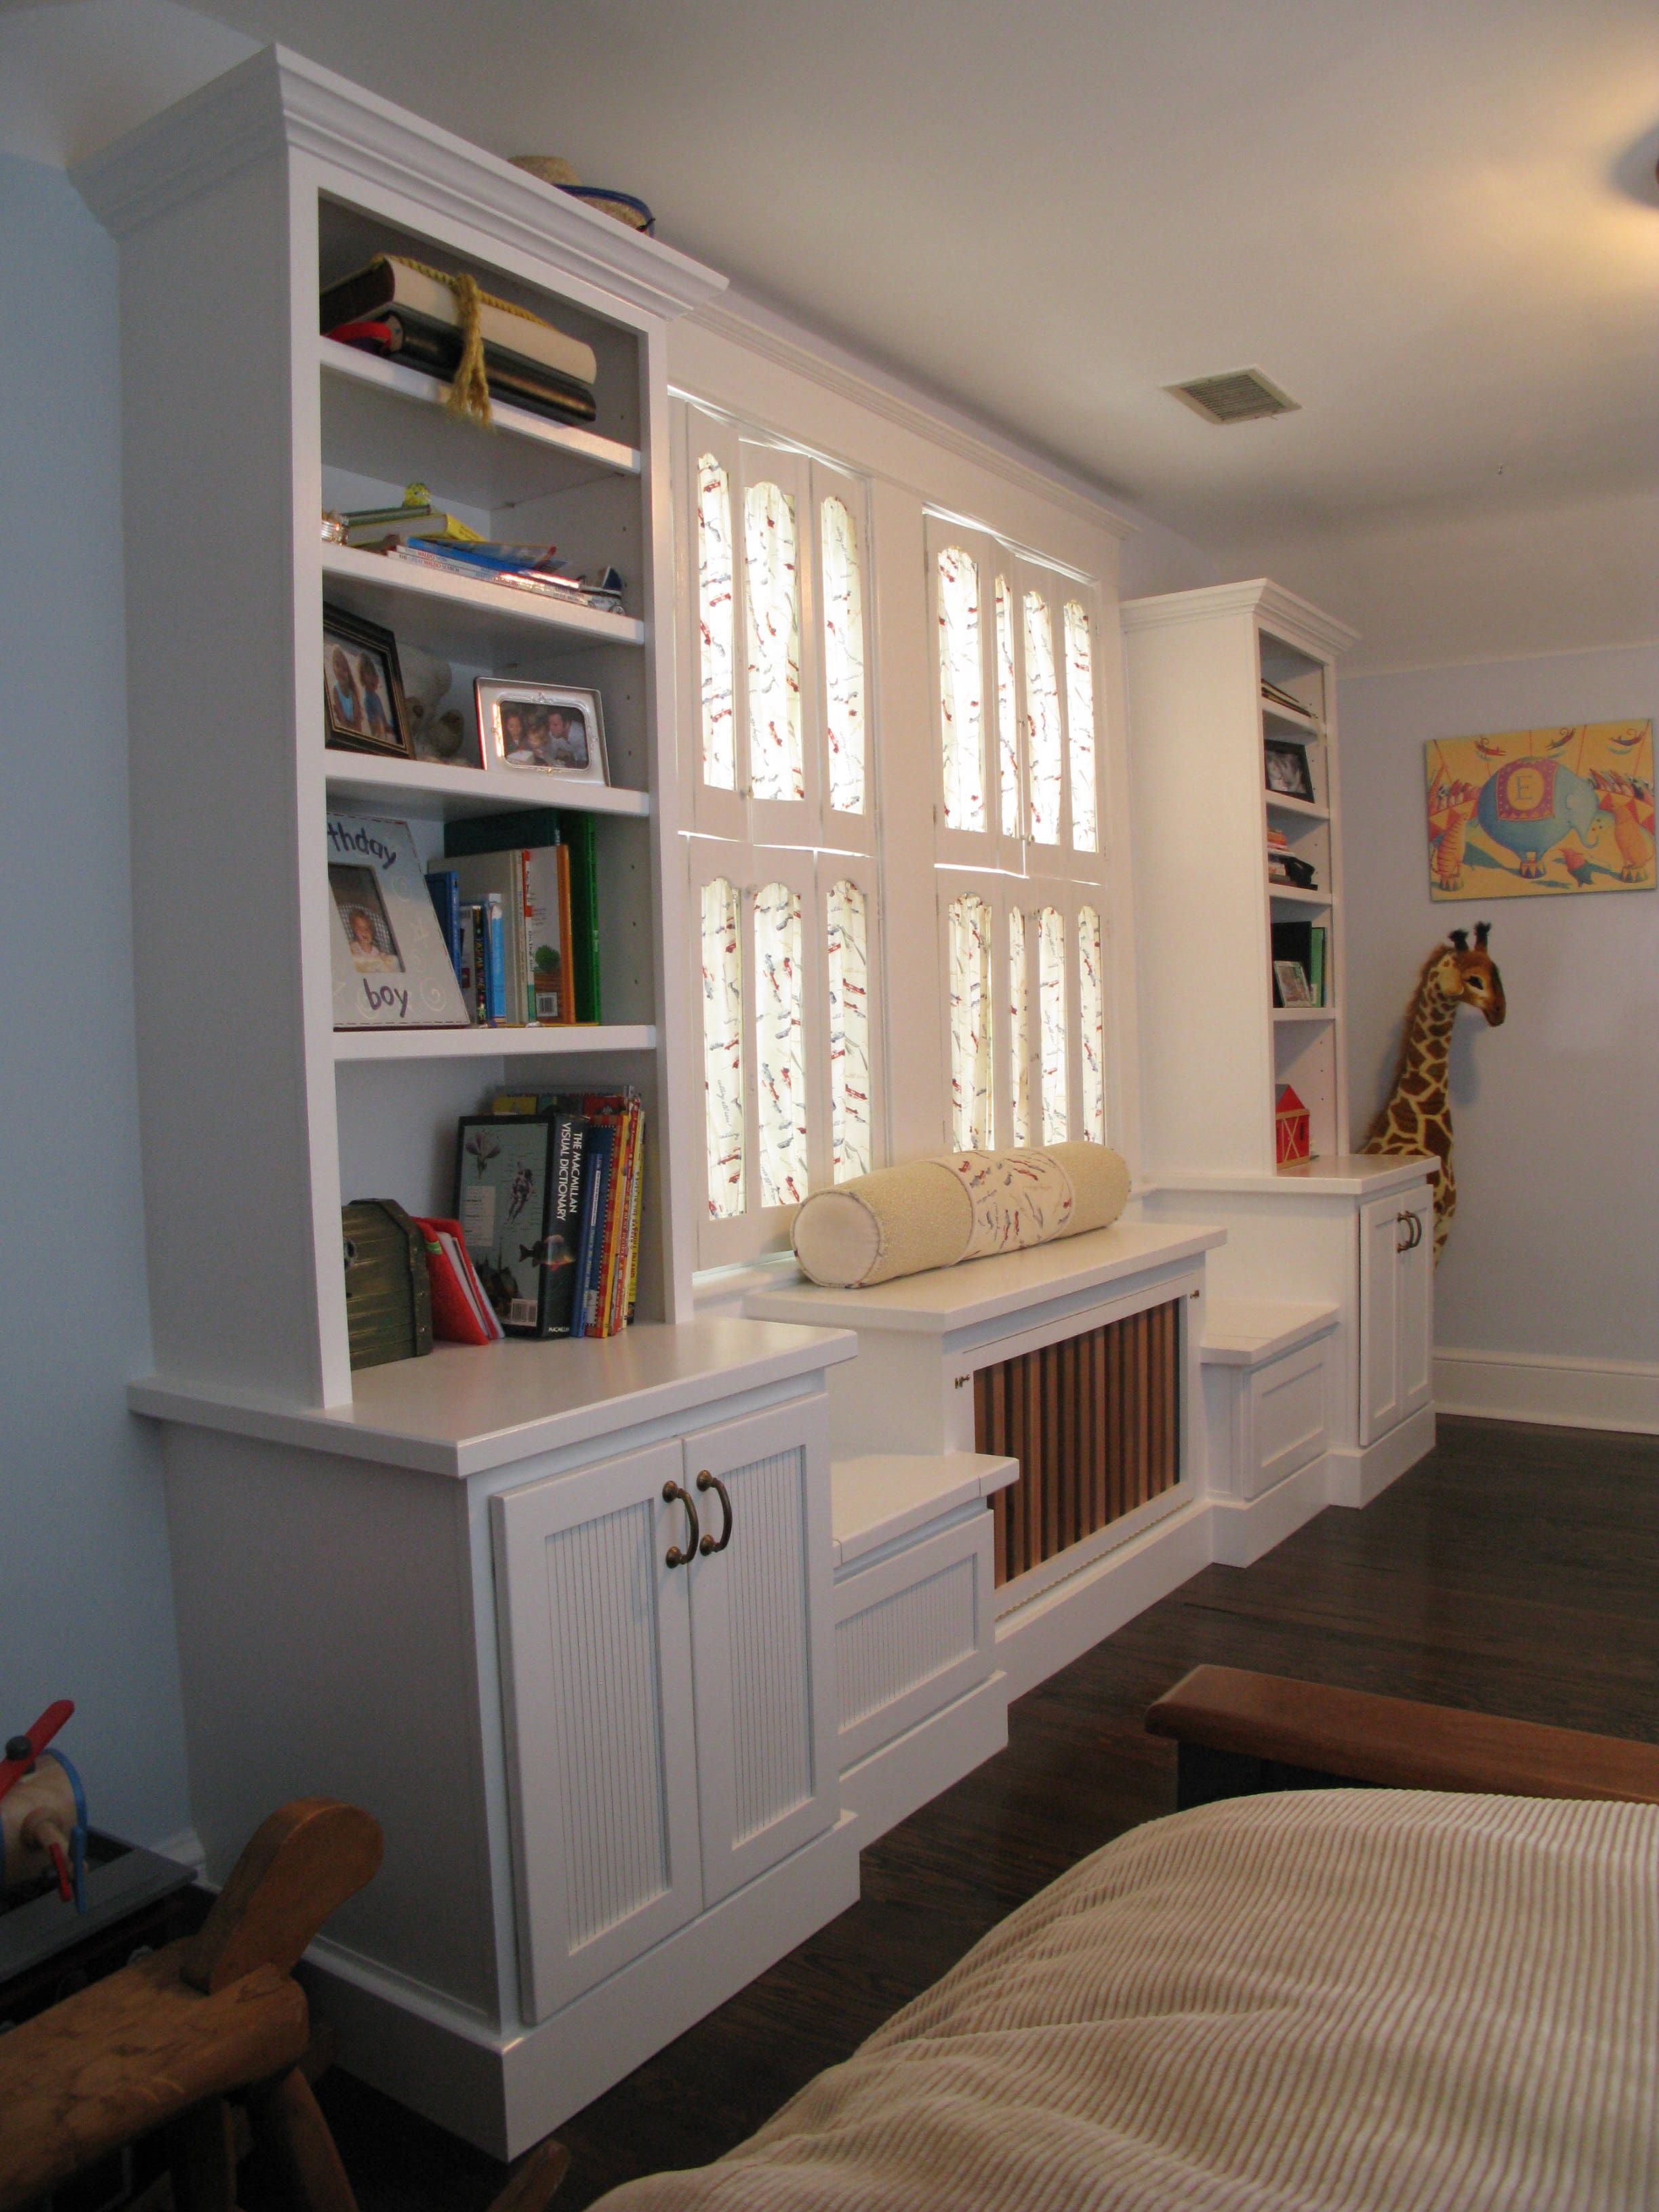 Custom Home Renovations Wasington Dc Archive Four Brothers Llc Within Radiator Covers With Bookshelves (View 15 of 15)